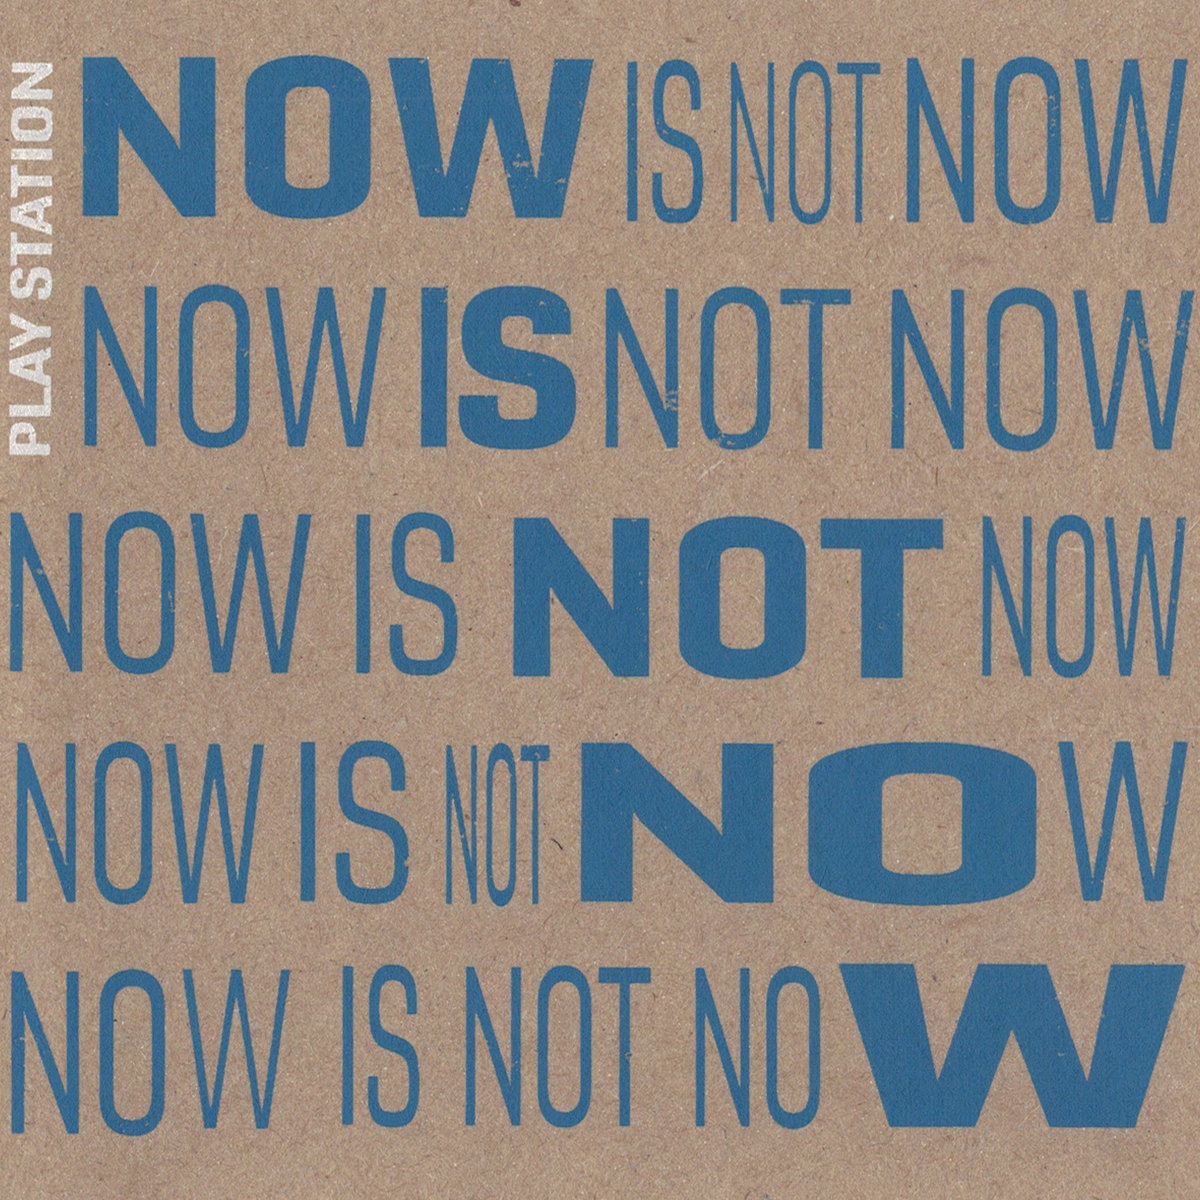 NOW IS NOT NOW